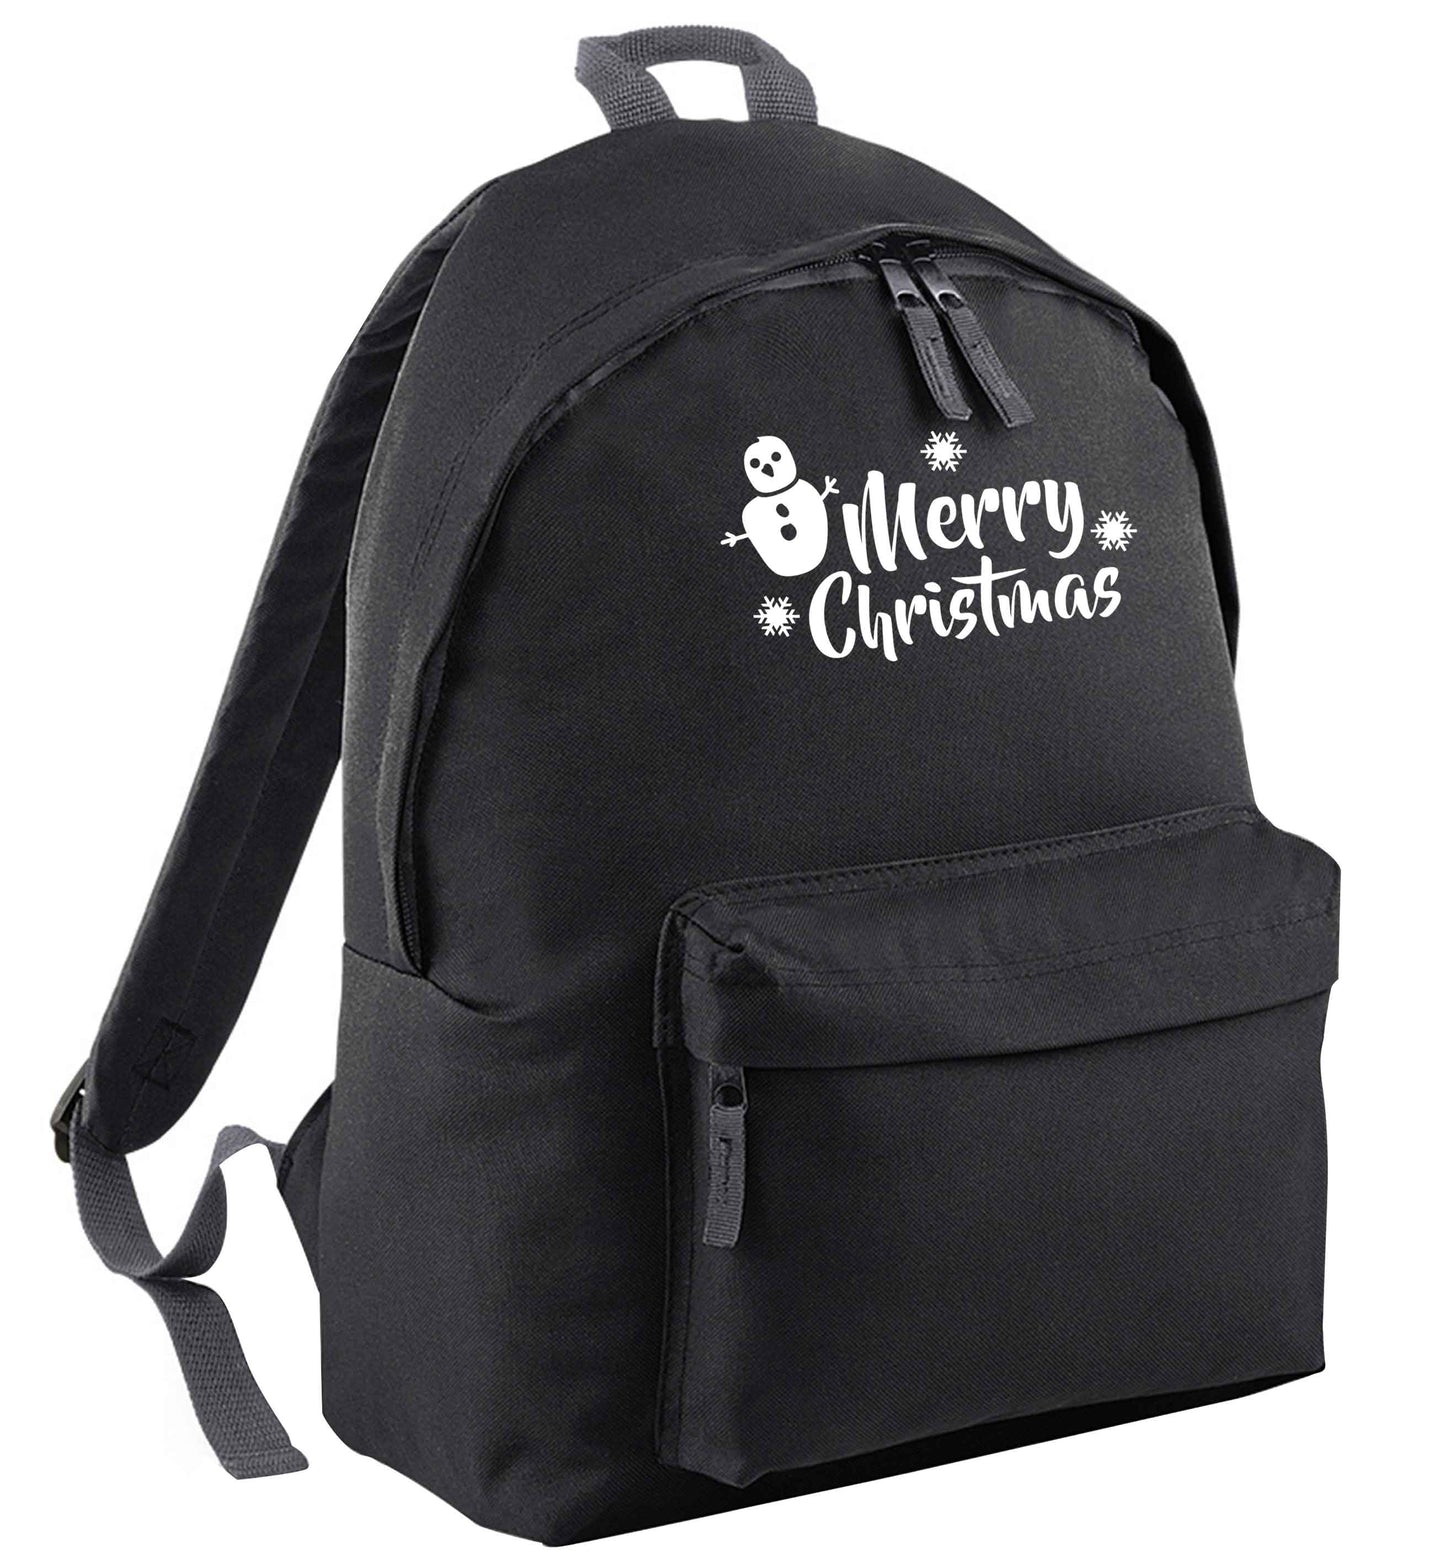 Merry Christmas - snowman black adults backpack